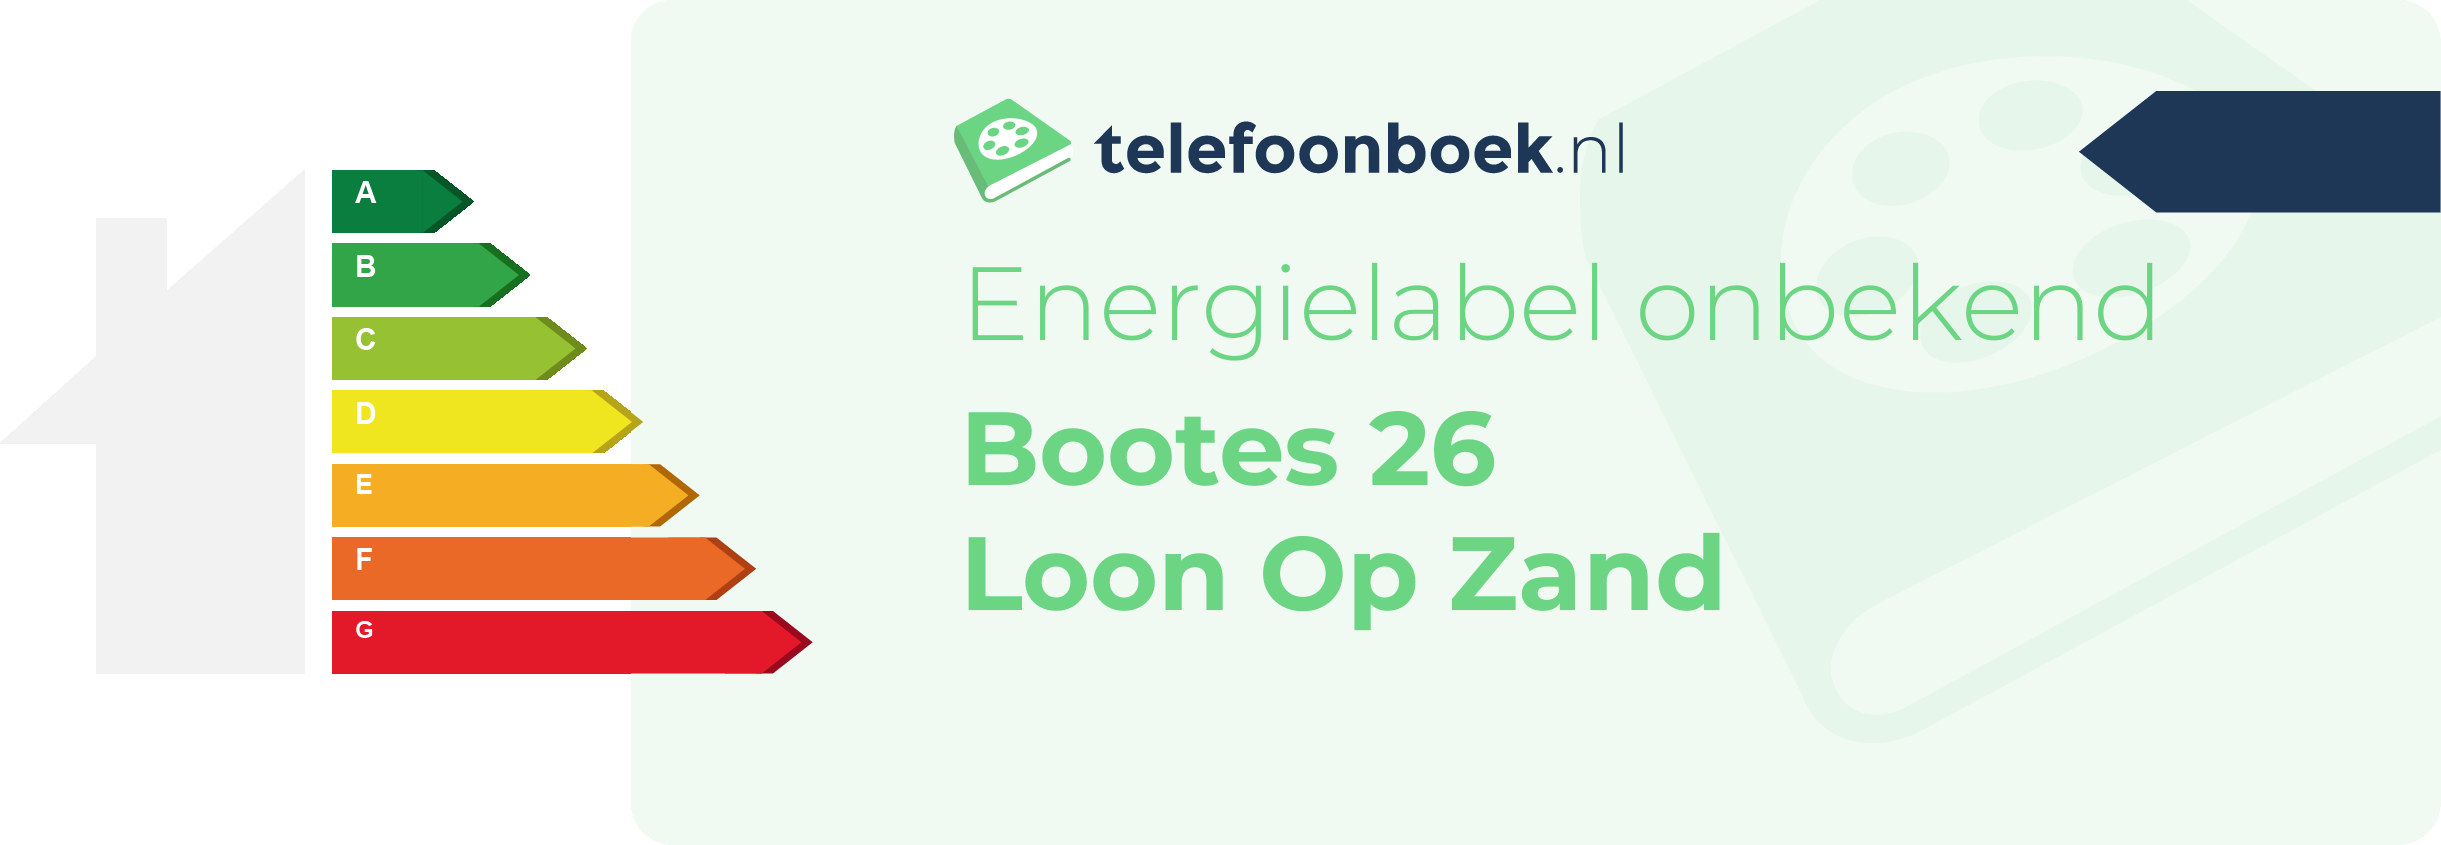 Energielabel Bootes 26 Loon Op Zand